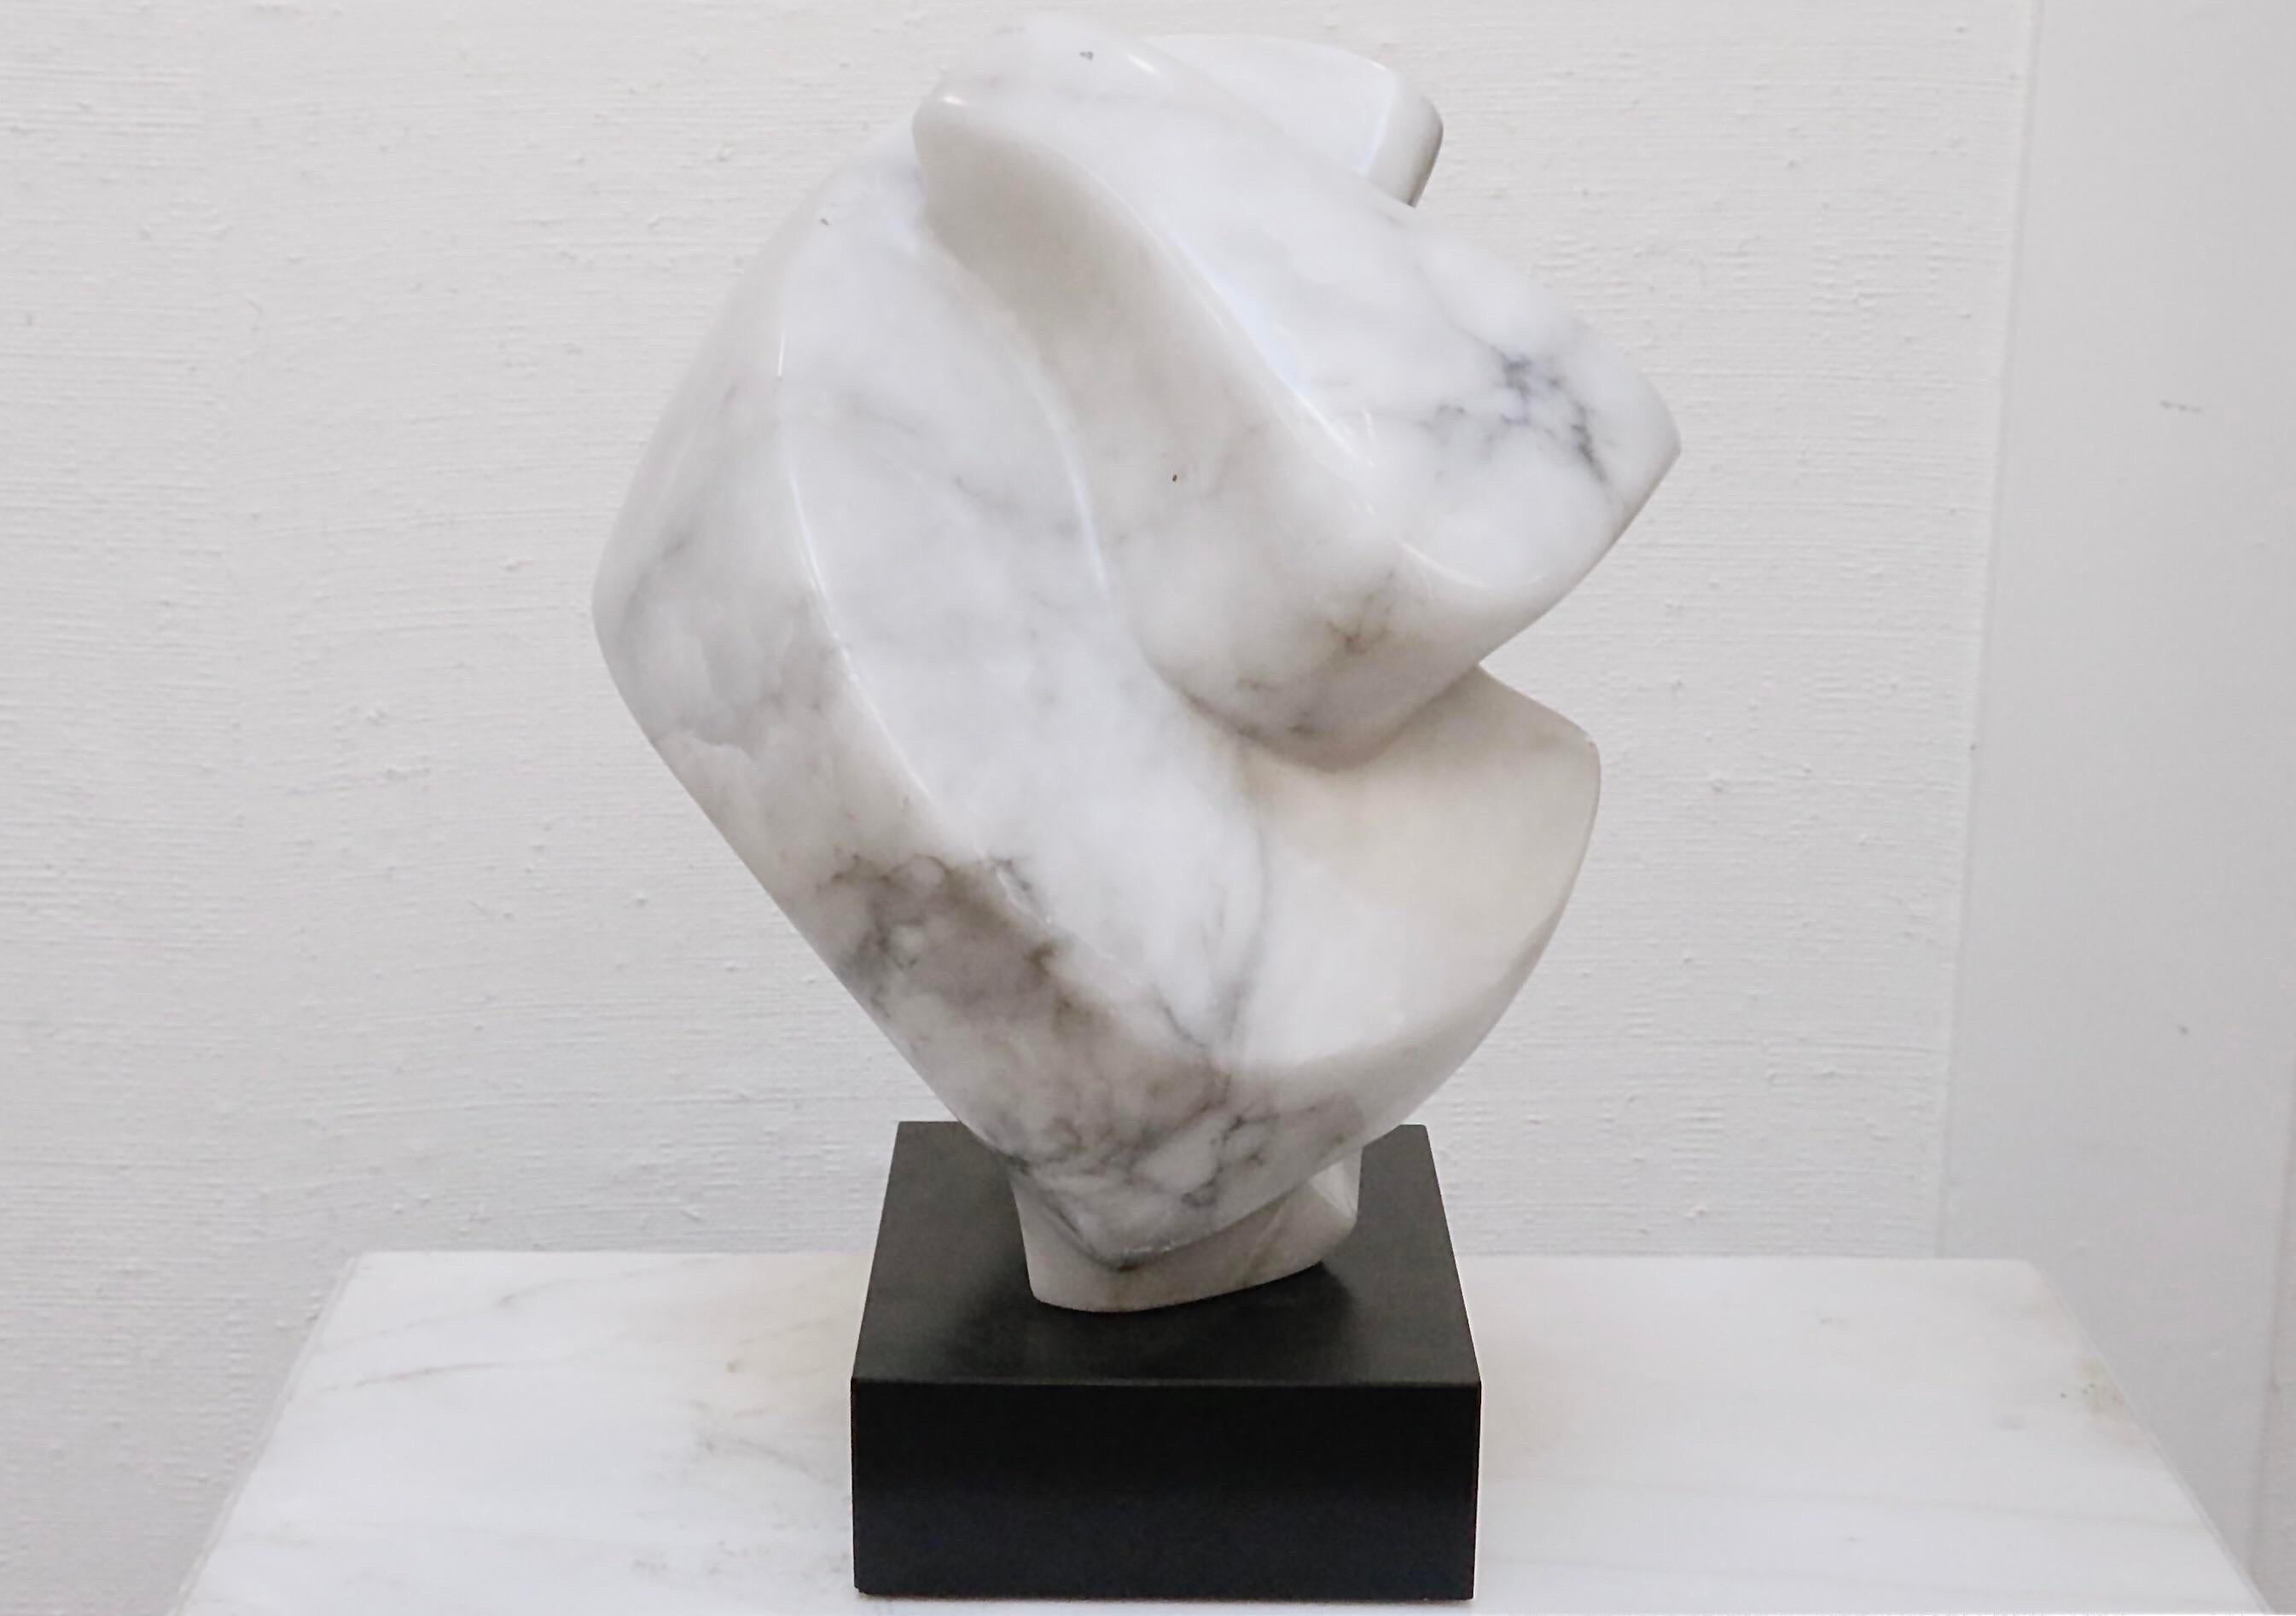 A fabulous contemporary sculpture made of solid alabaster. Gentle angled curves inspire perhaps a closed fist or a large knot. Stands on a black base. Make a statement with this substantial piece of art!